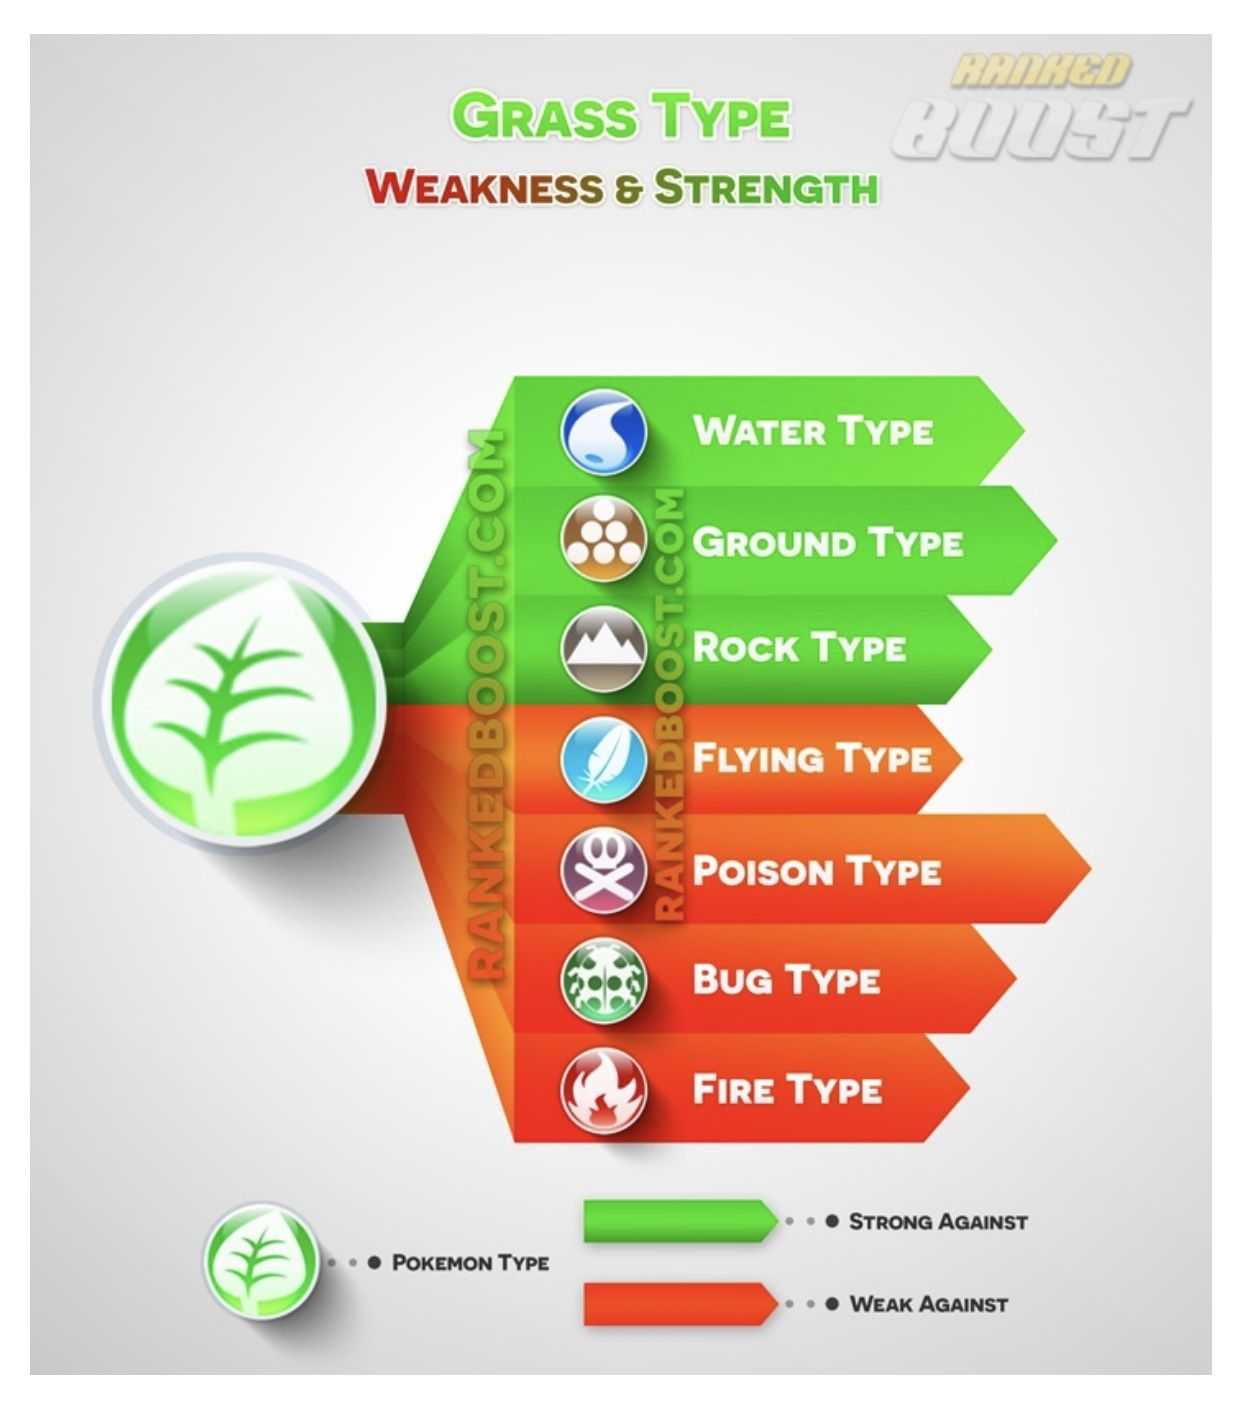 GRASS strengths and weaknesses